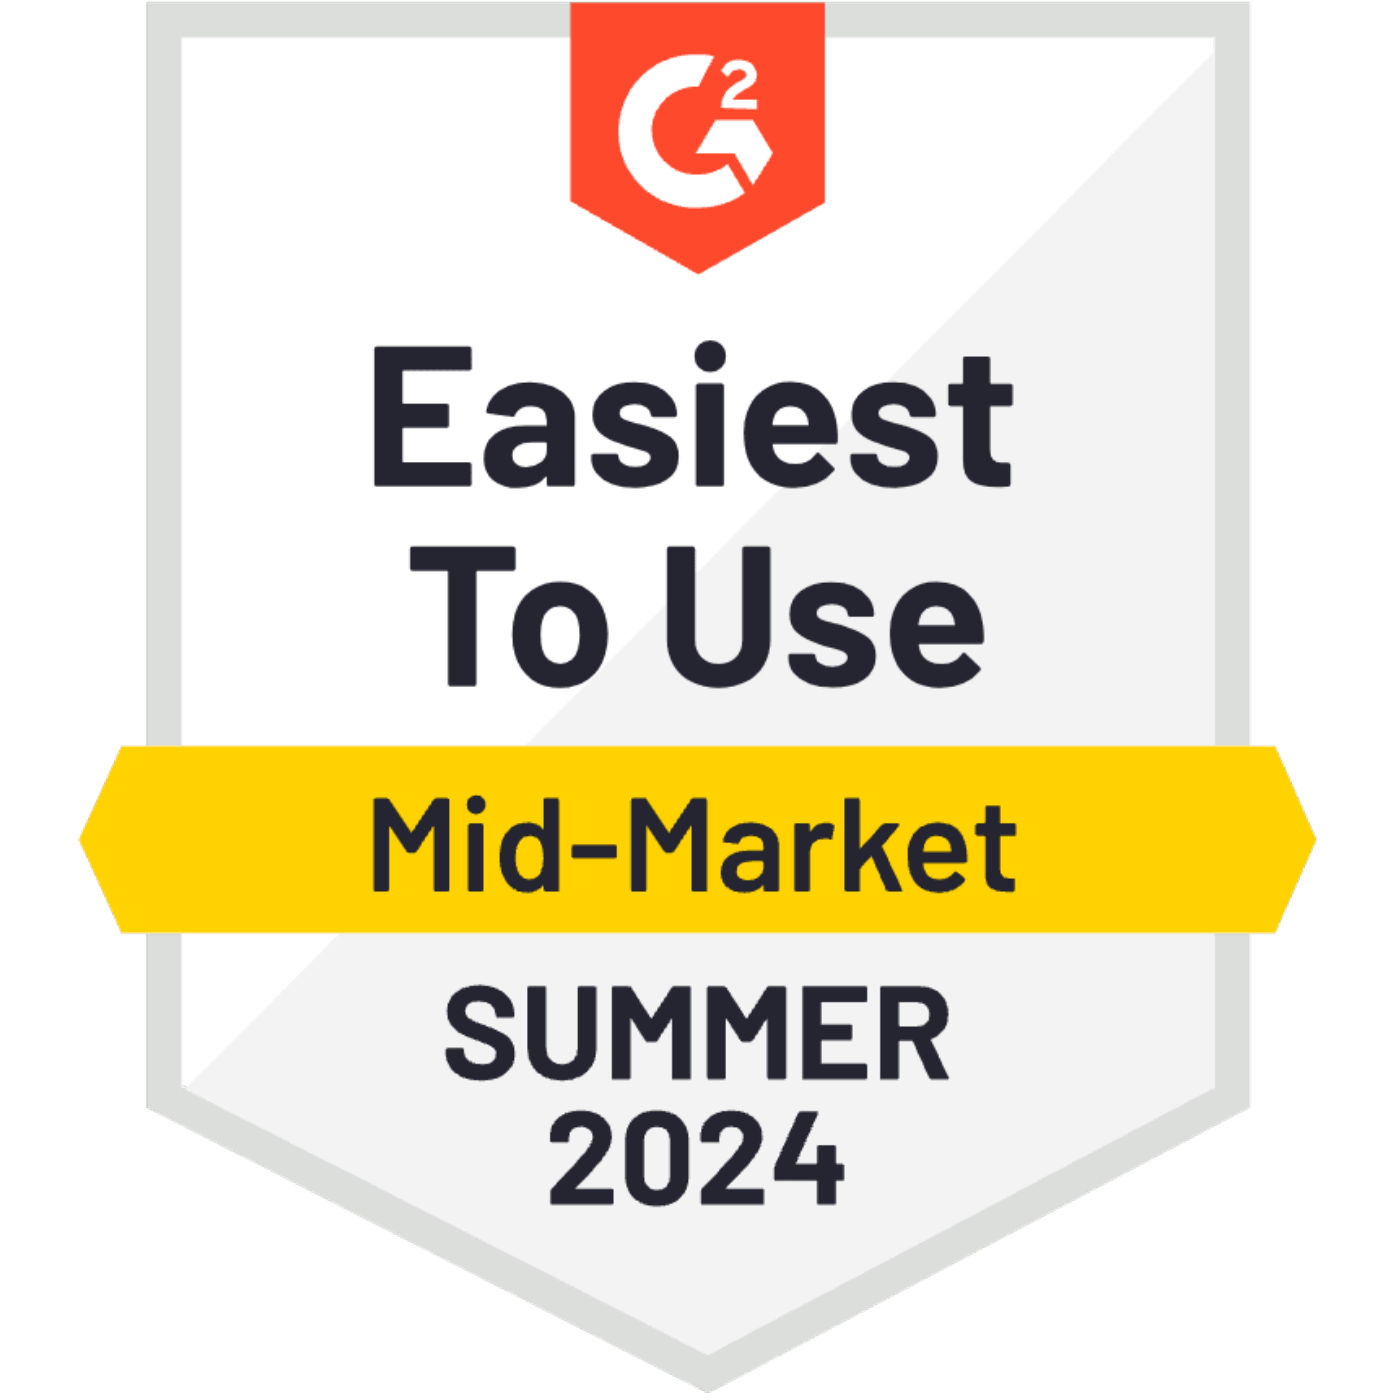 G2 Easiest to Use Mid Market Summer 2024